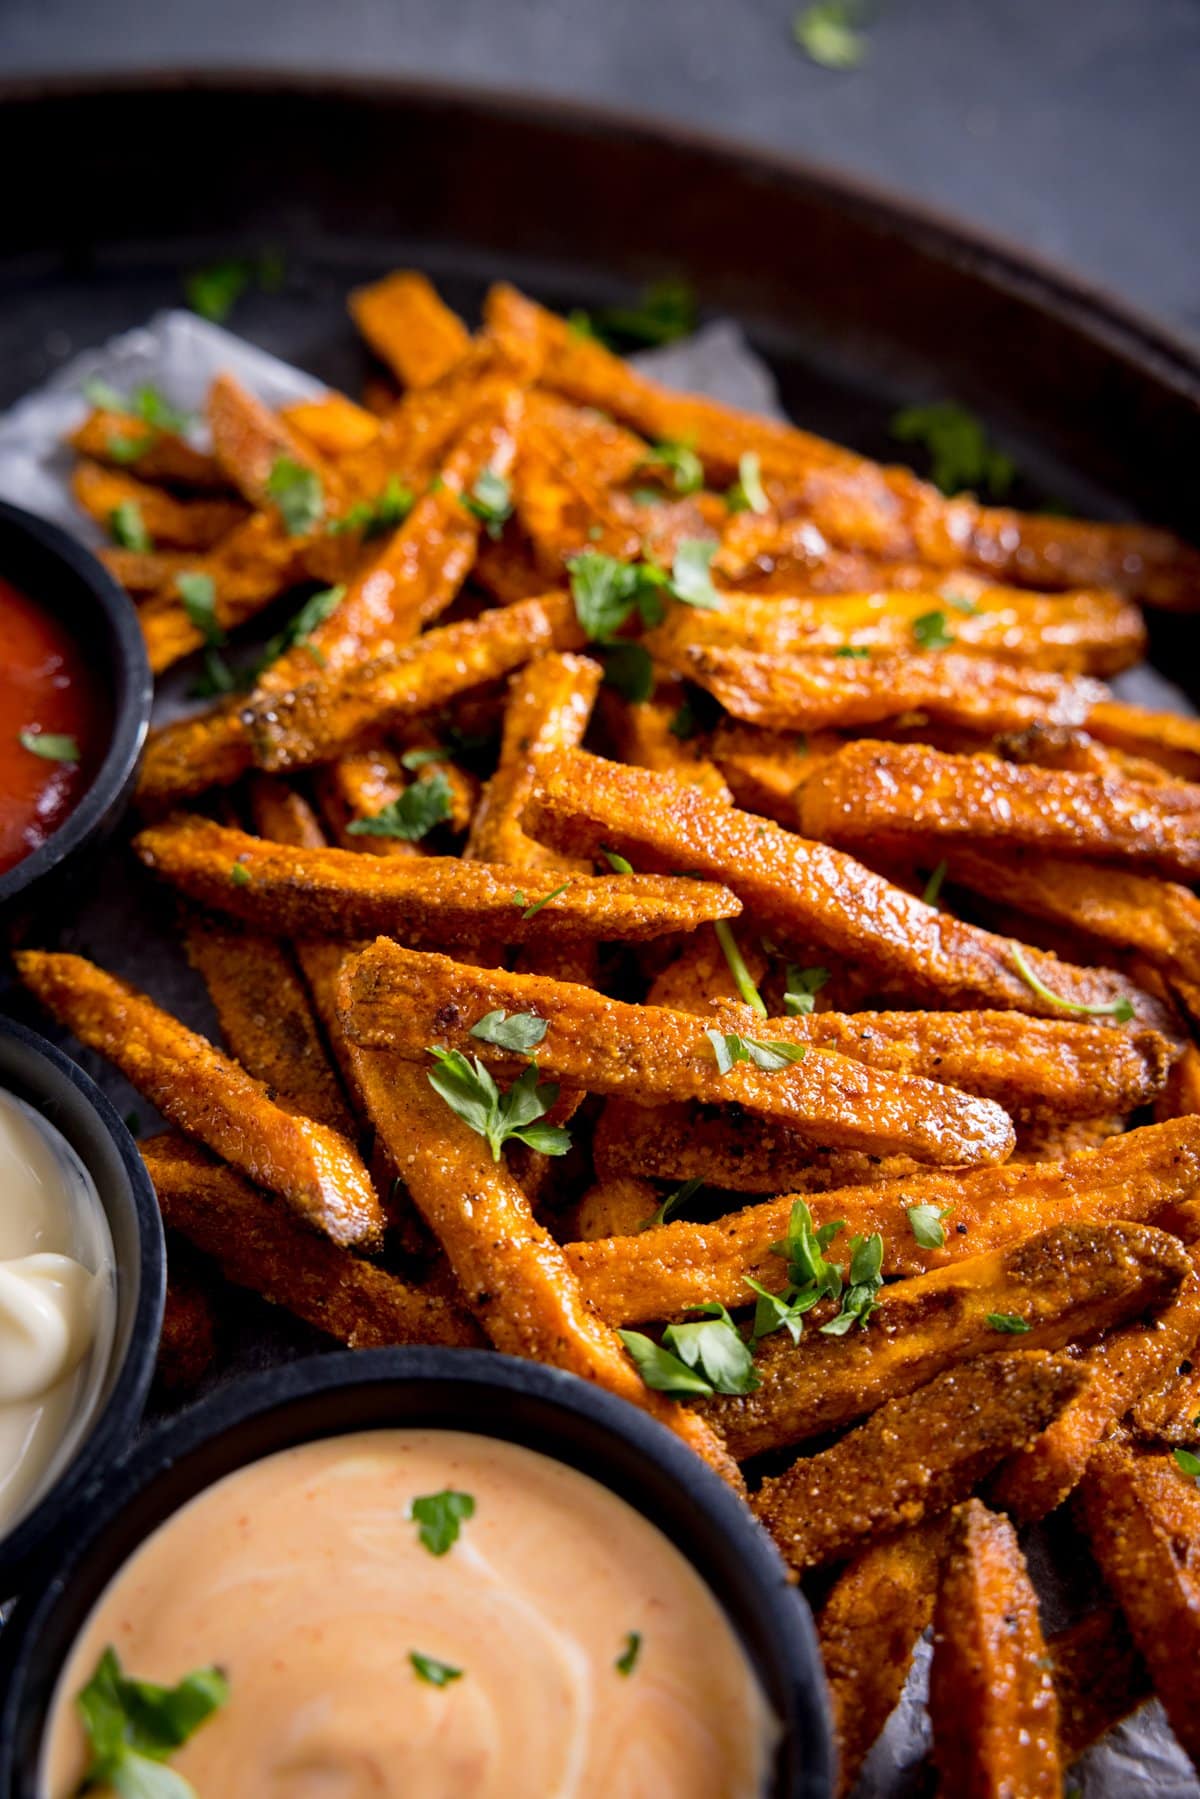 A close up of cooked sweet potato fries, sprinkled with parsley, with some dips in small bowls on the side